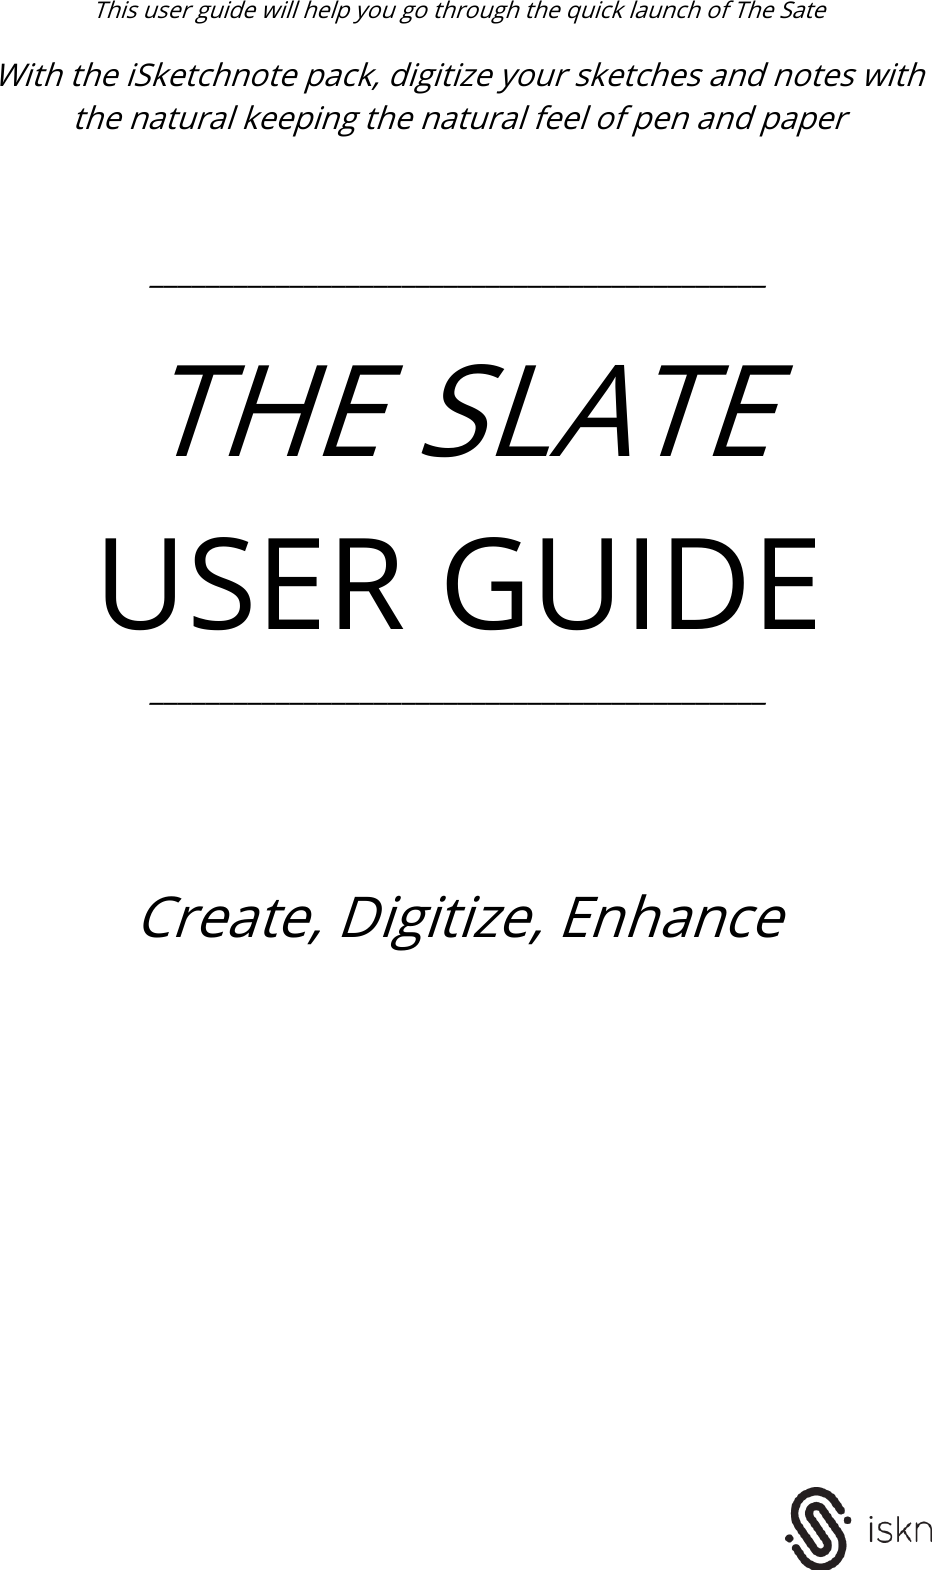  This user guide will help you go through the quick launch of The Sate   With the iSketchnote pack, digitize your sketches and notes with the natural keeping the natural feel of pen and paper      ____________________________________________  THE SLATE USER GUIDE ____________________________________________       Create, Digitize, Enhance    